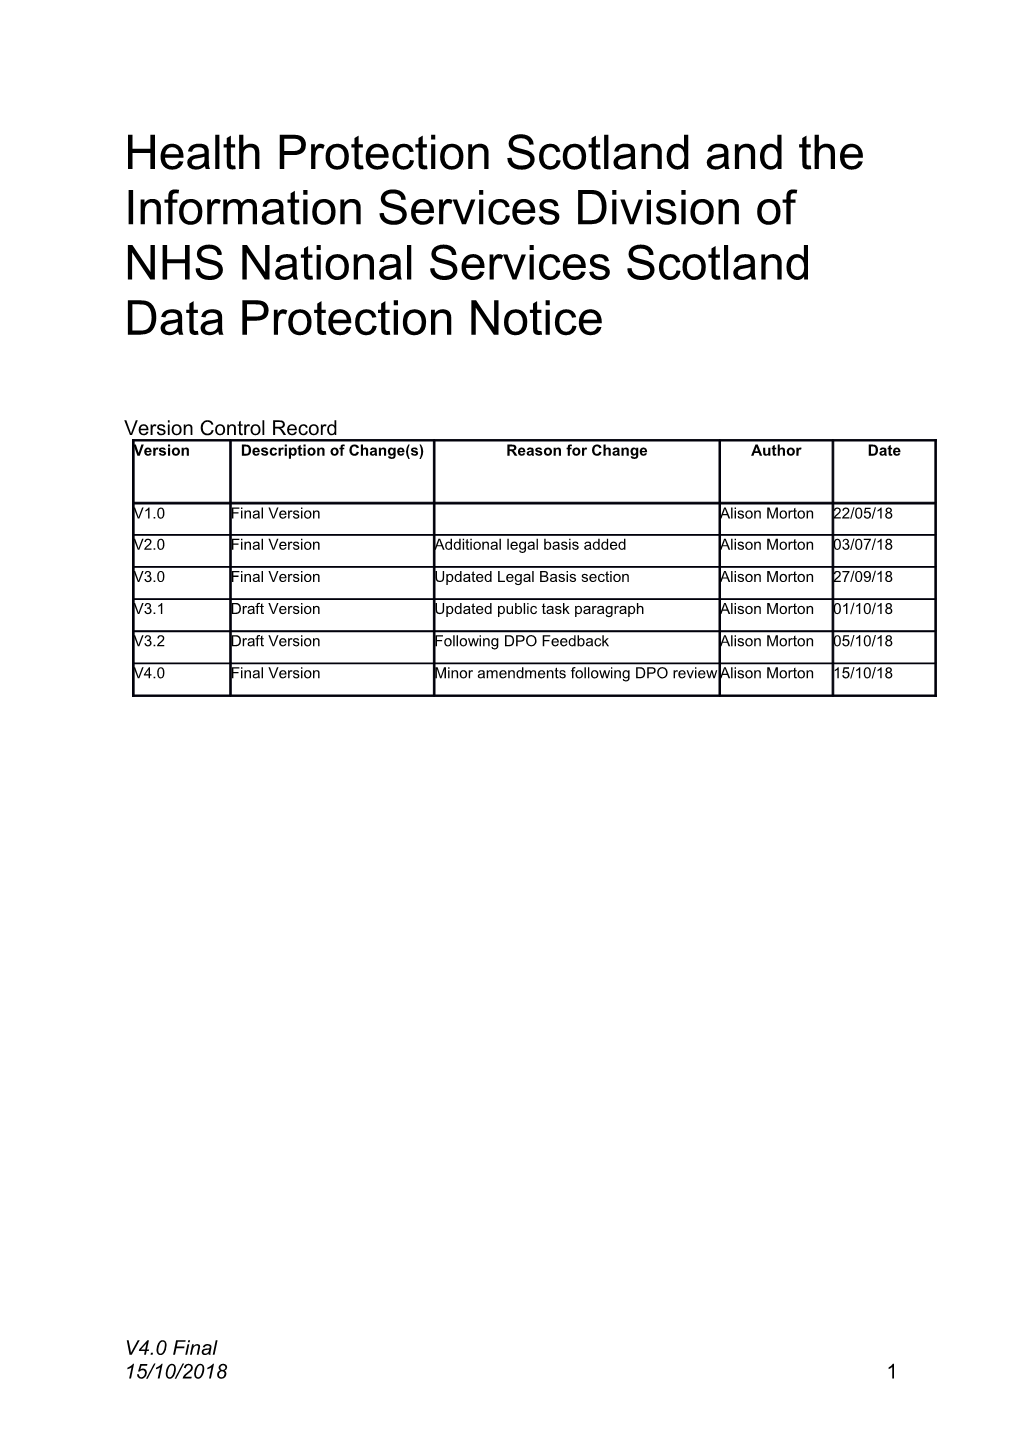 Health Protection Scotland and the Information Services Division of NHS National Services